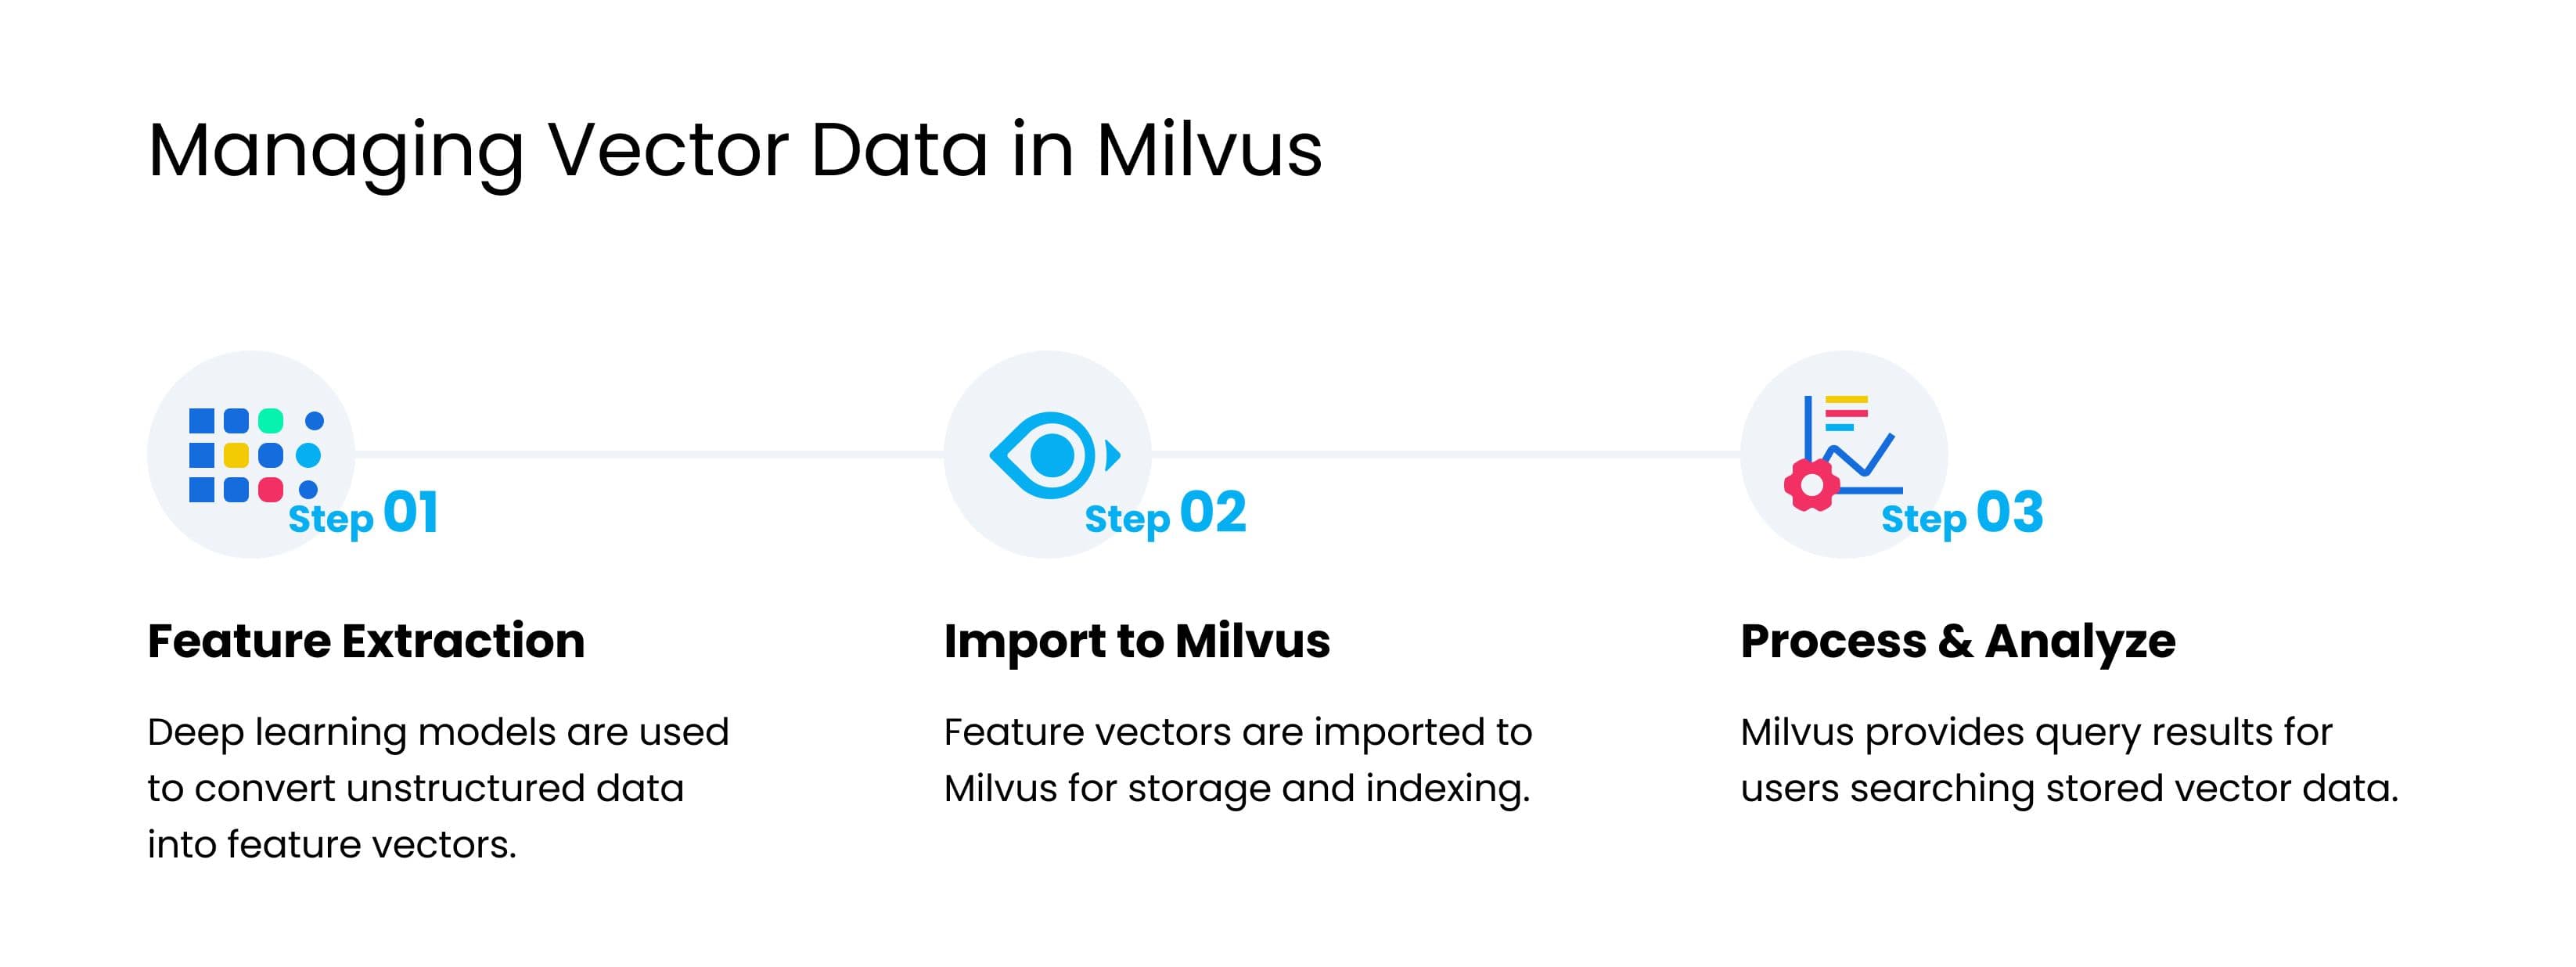 How does Milvus manage vector data?